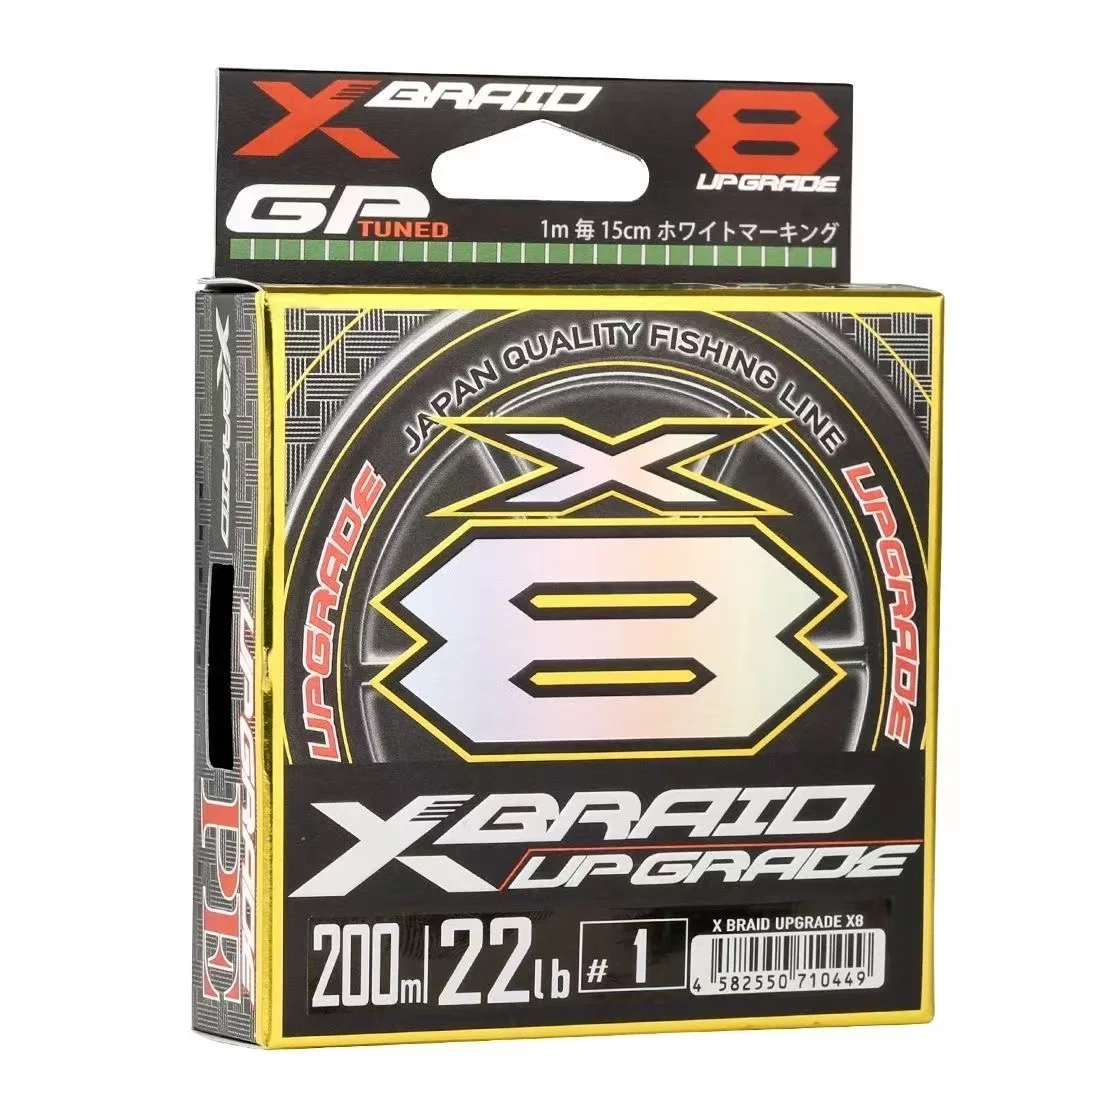 

YGK XBRAID X8 Upgrade Braid Fishing Line Super Strong 8 Strands Multifilament PE line 150M 200M MADE IN Japan 14LB -60LB